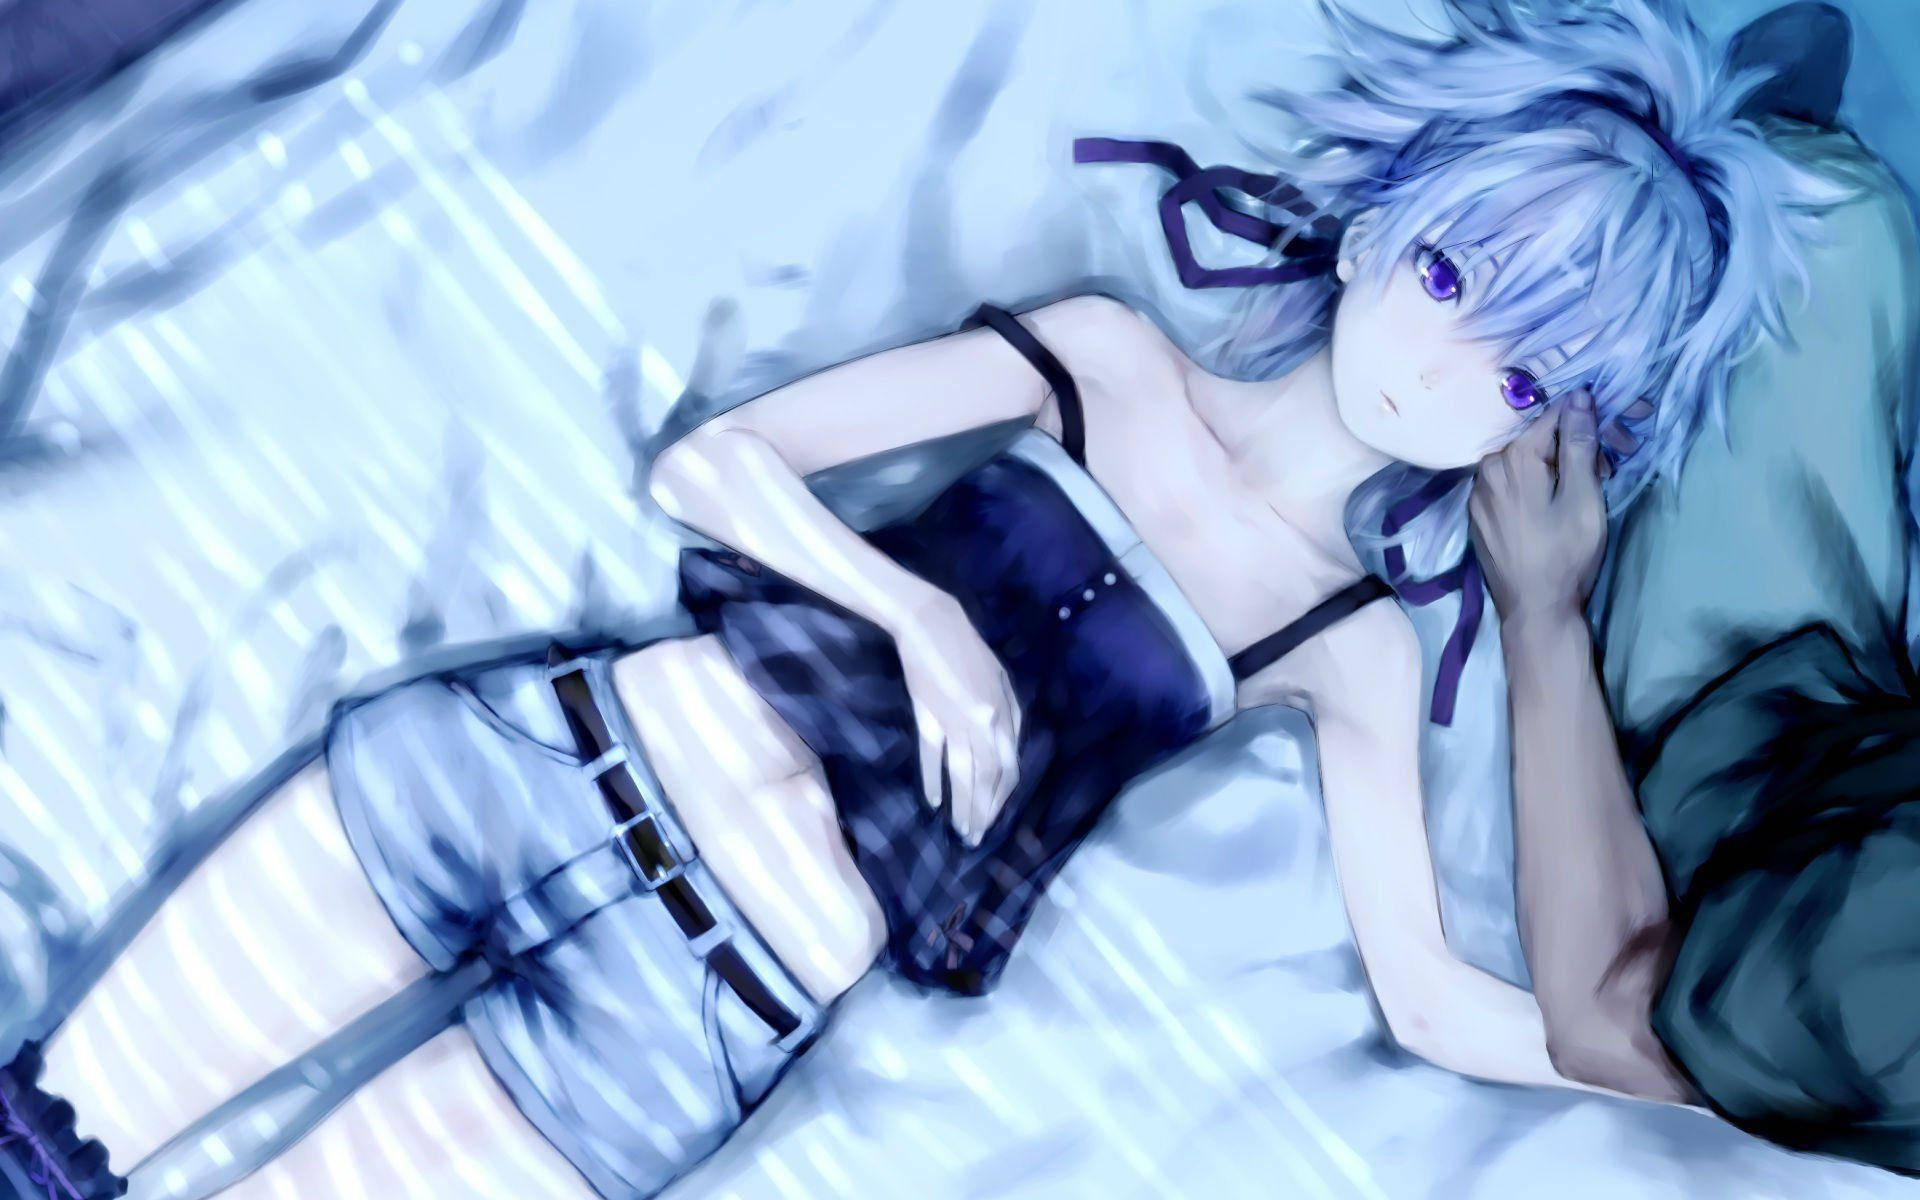 Anime girl lying on the bed with man's hand touching her face wallpaper